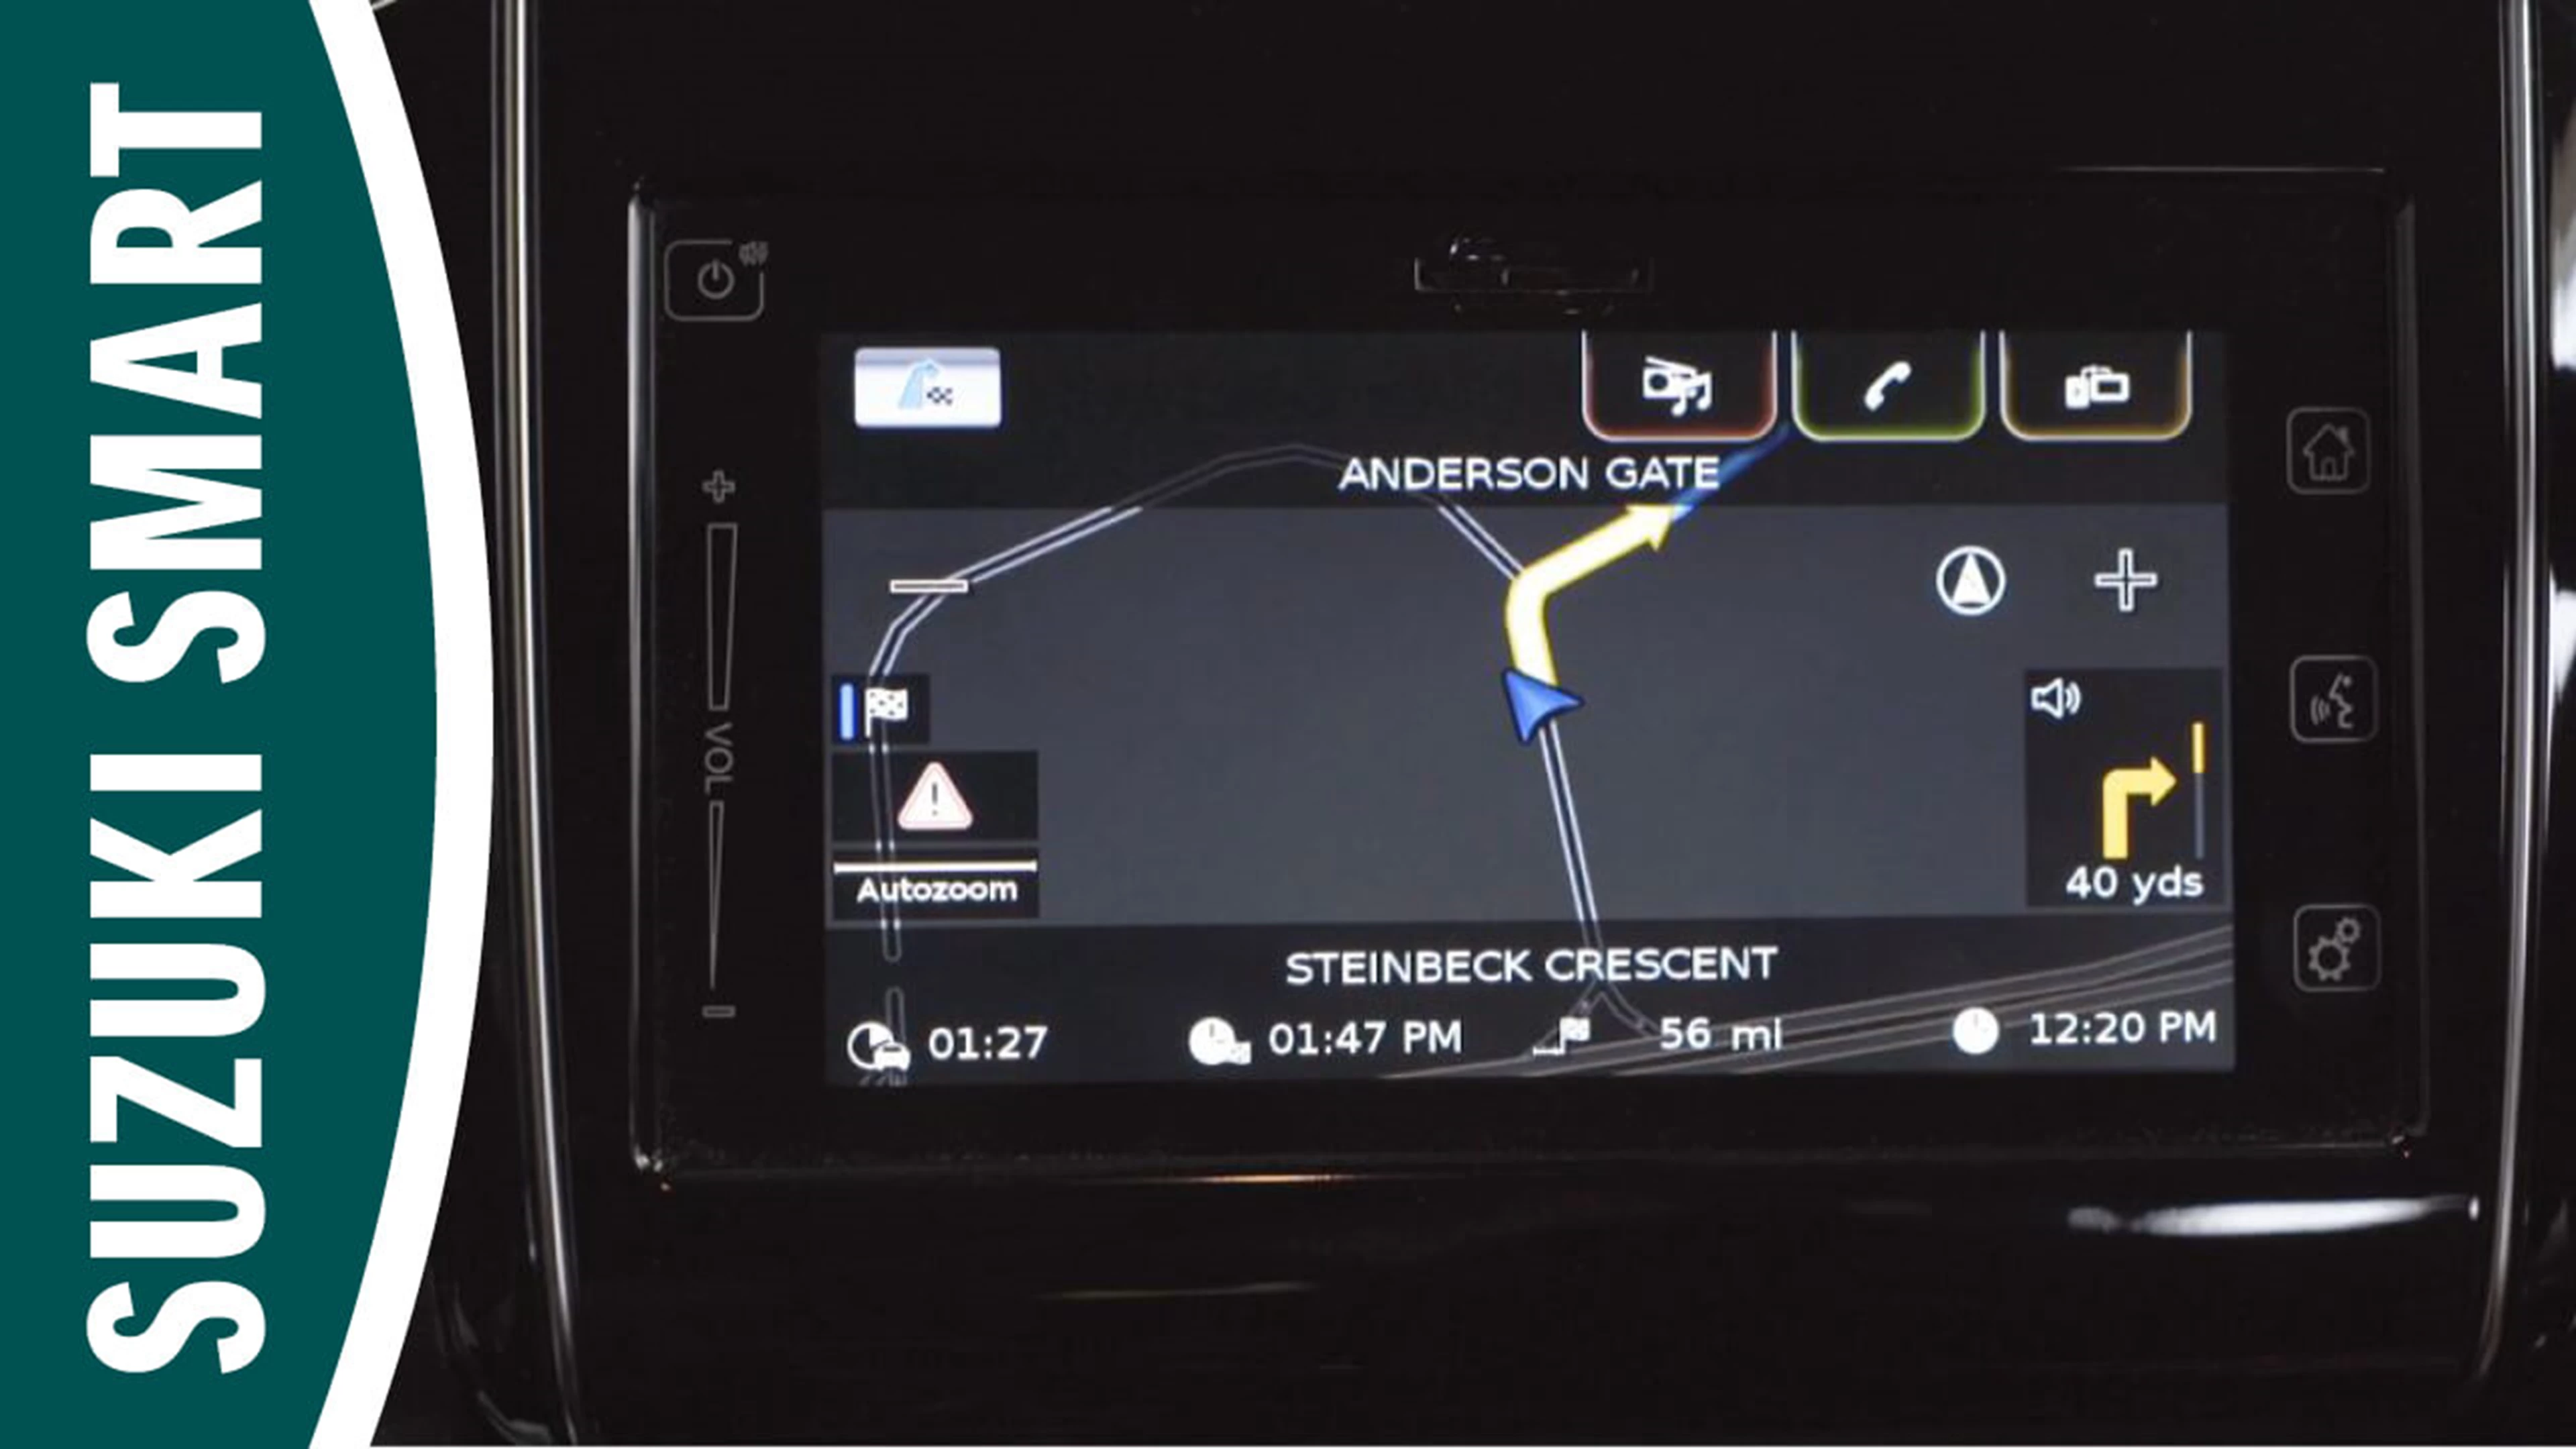 Navigation working in car